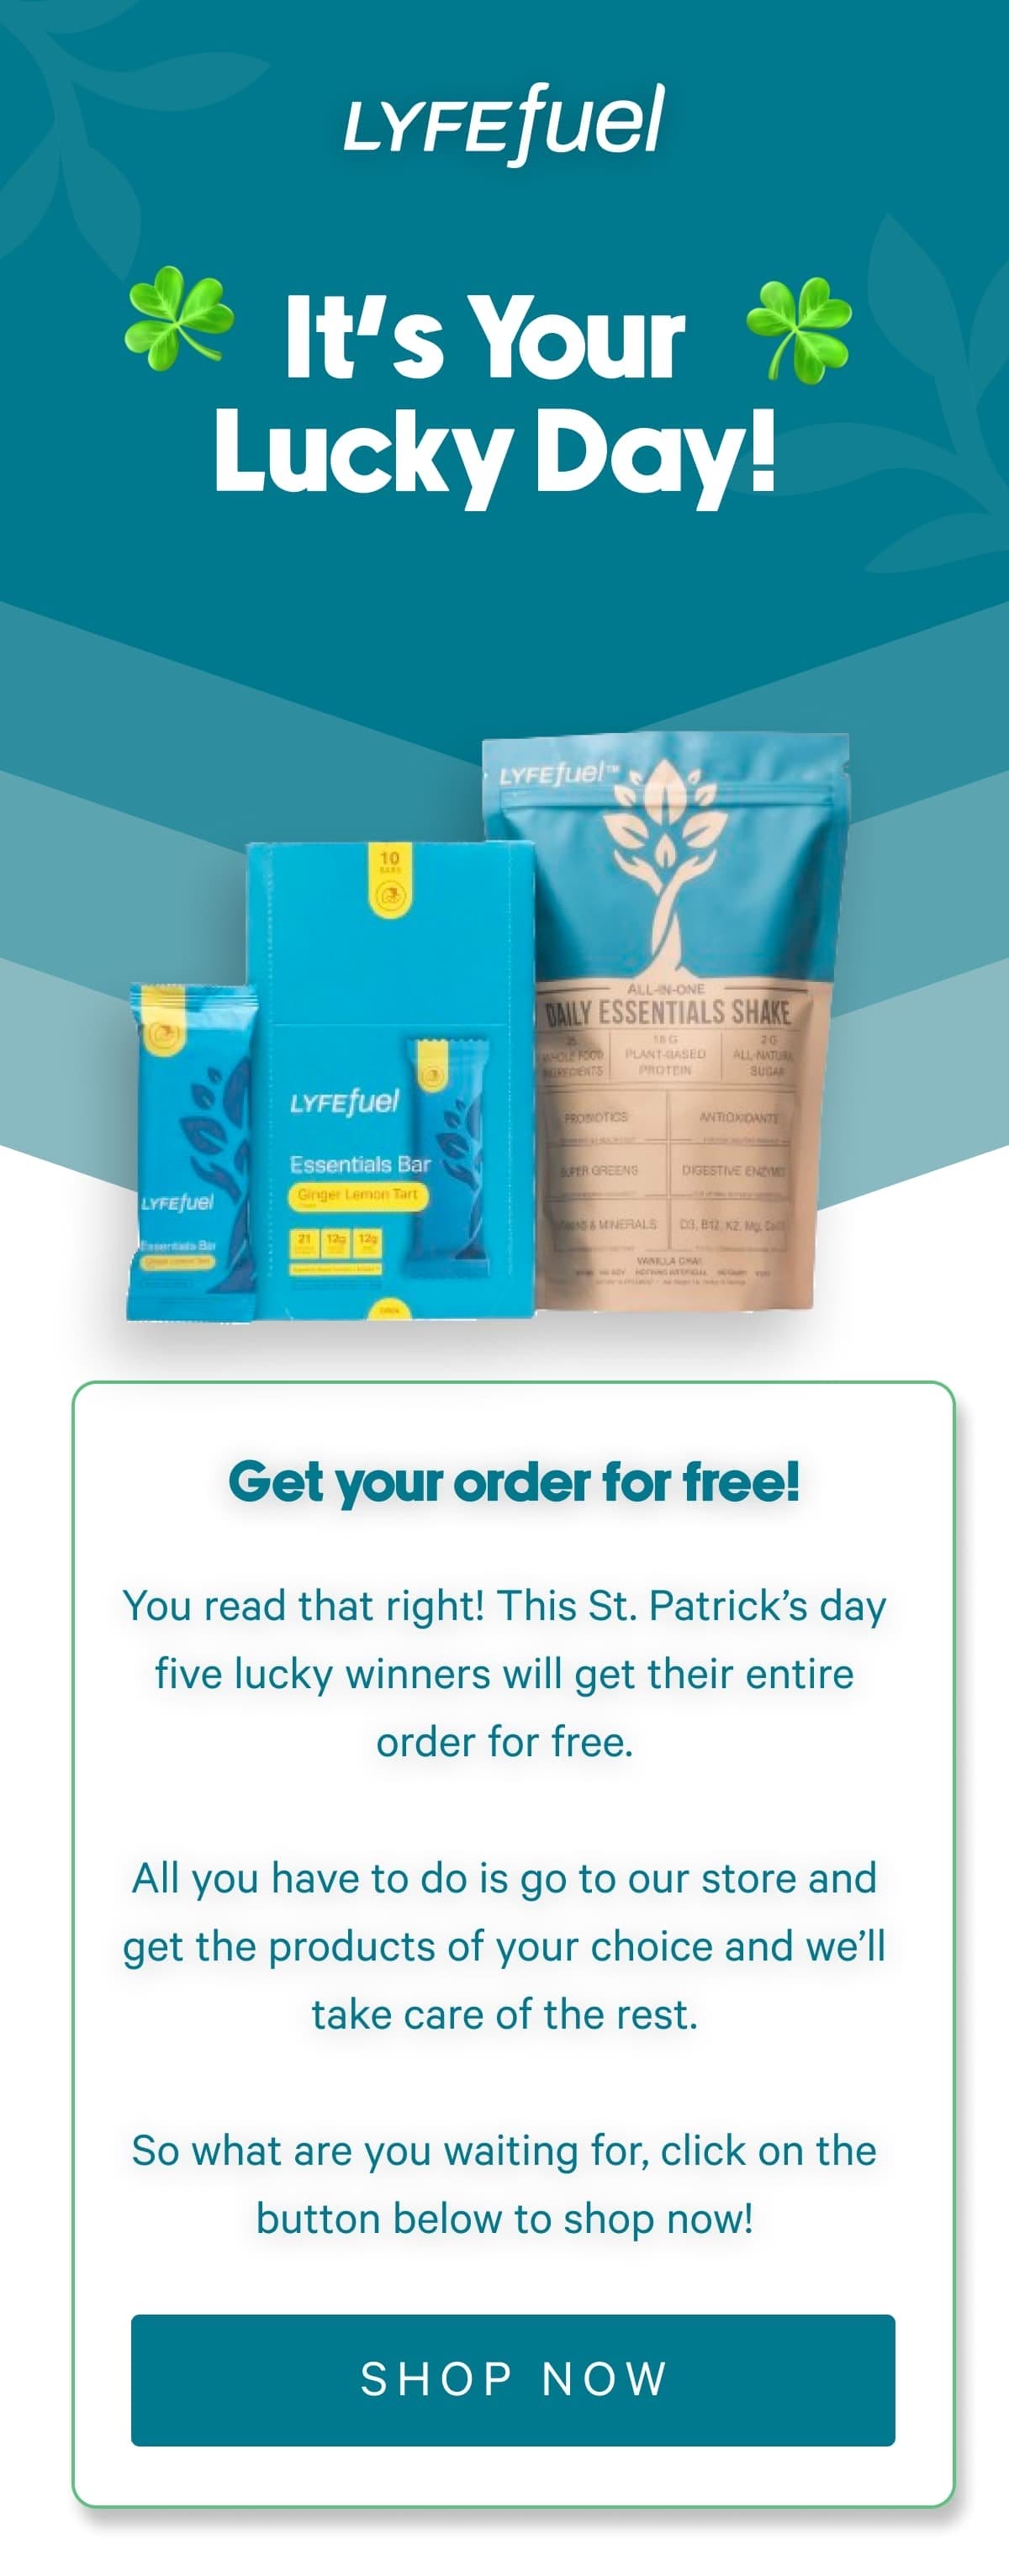 You read that right! This St. Patrick’s day five lucky winners will get their entire order for free.  All you have to do is go to our store and get the products of your choice and we’ll take care of the rest.  So what are you waiting for, click on the button below to shop now!